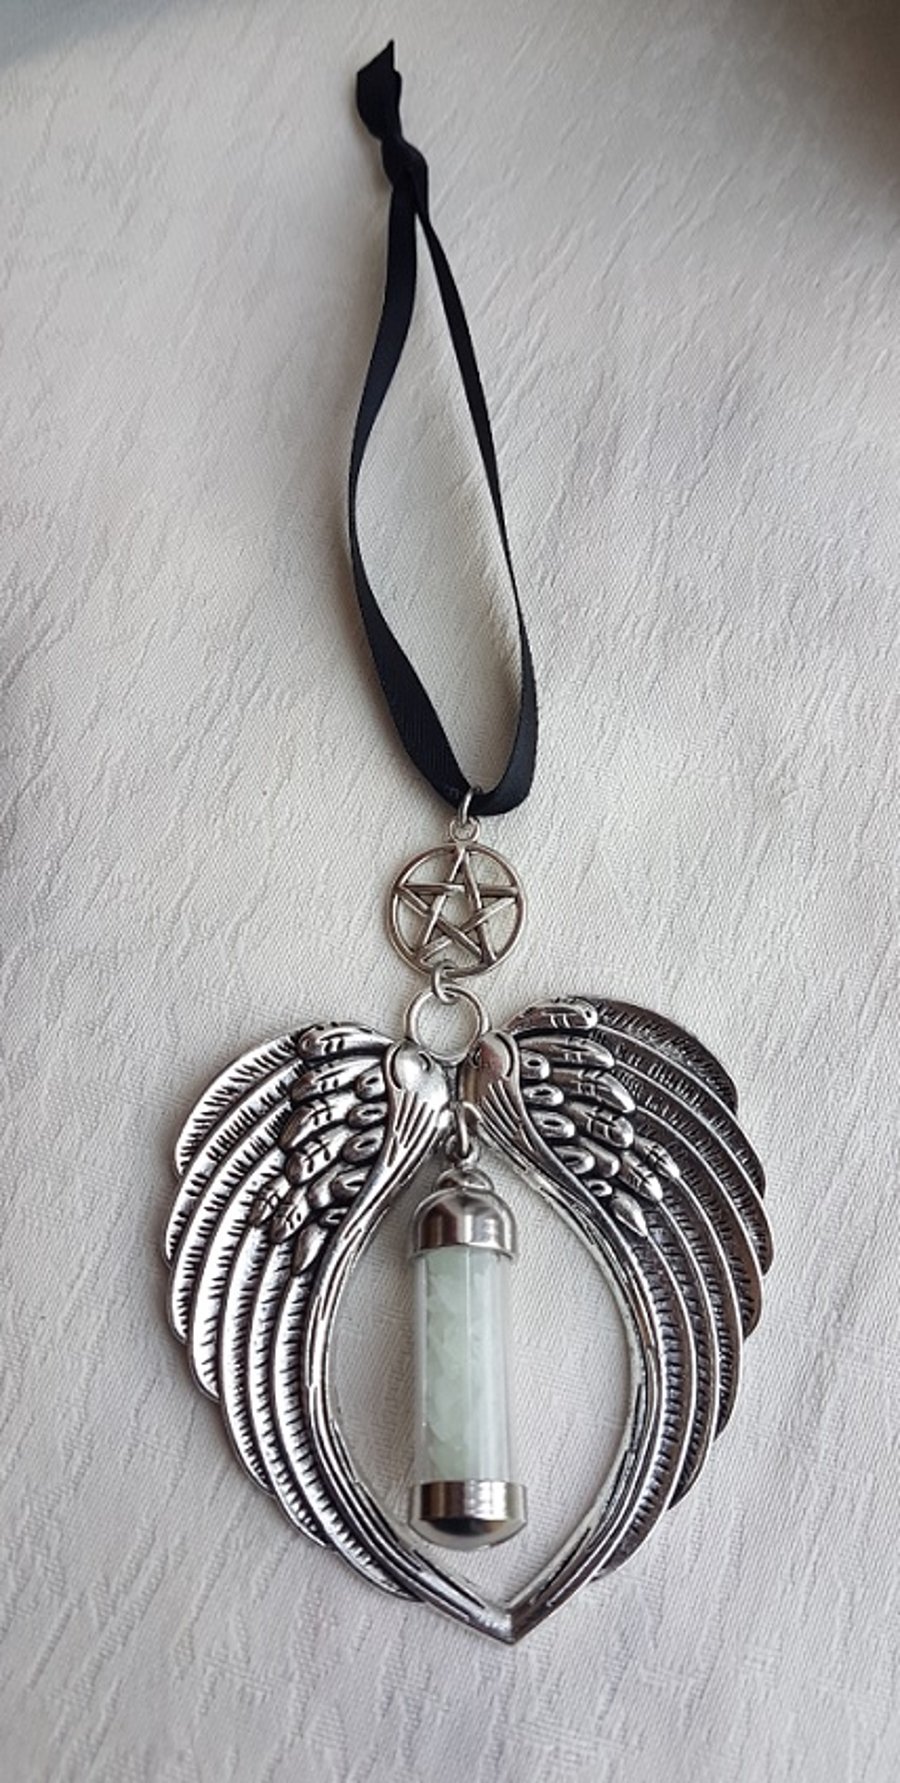 Gorgeous Angel Wings Hanging Decoration with Pentacle.